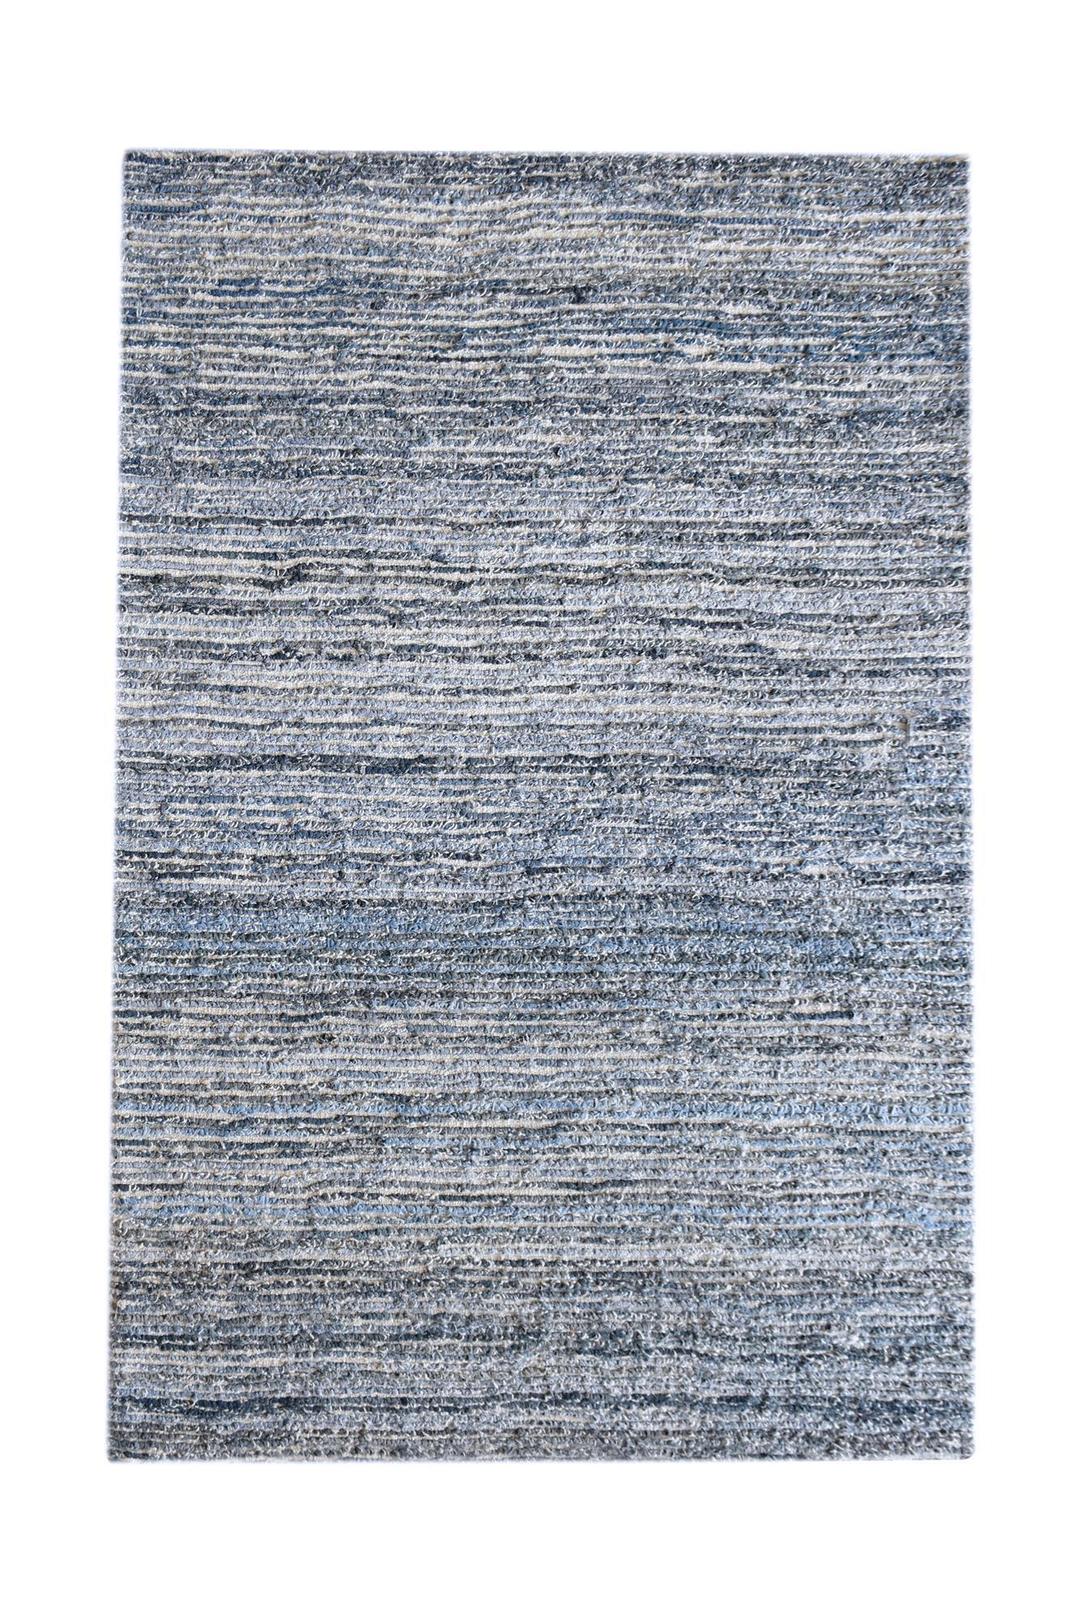 Savannah Recycled Denim & Wool Rug-Comfort-NZ WOOL & WOOL RUGS, RECYCLED FABRICS RUGS, RUGS, SUSTAINABLE DECOR-Forest Homes-Nature inspired decor-Nature decor